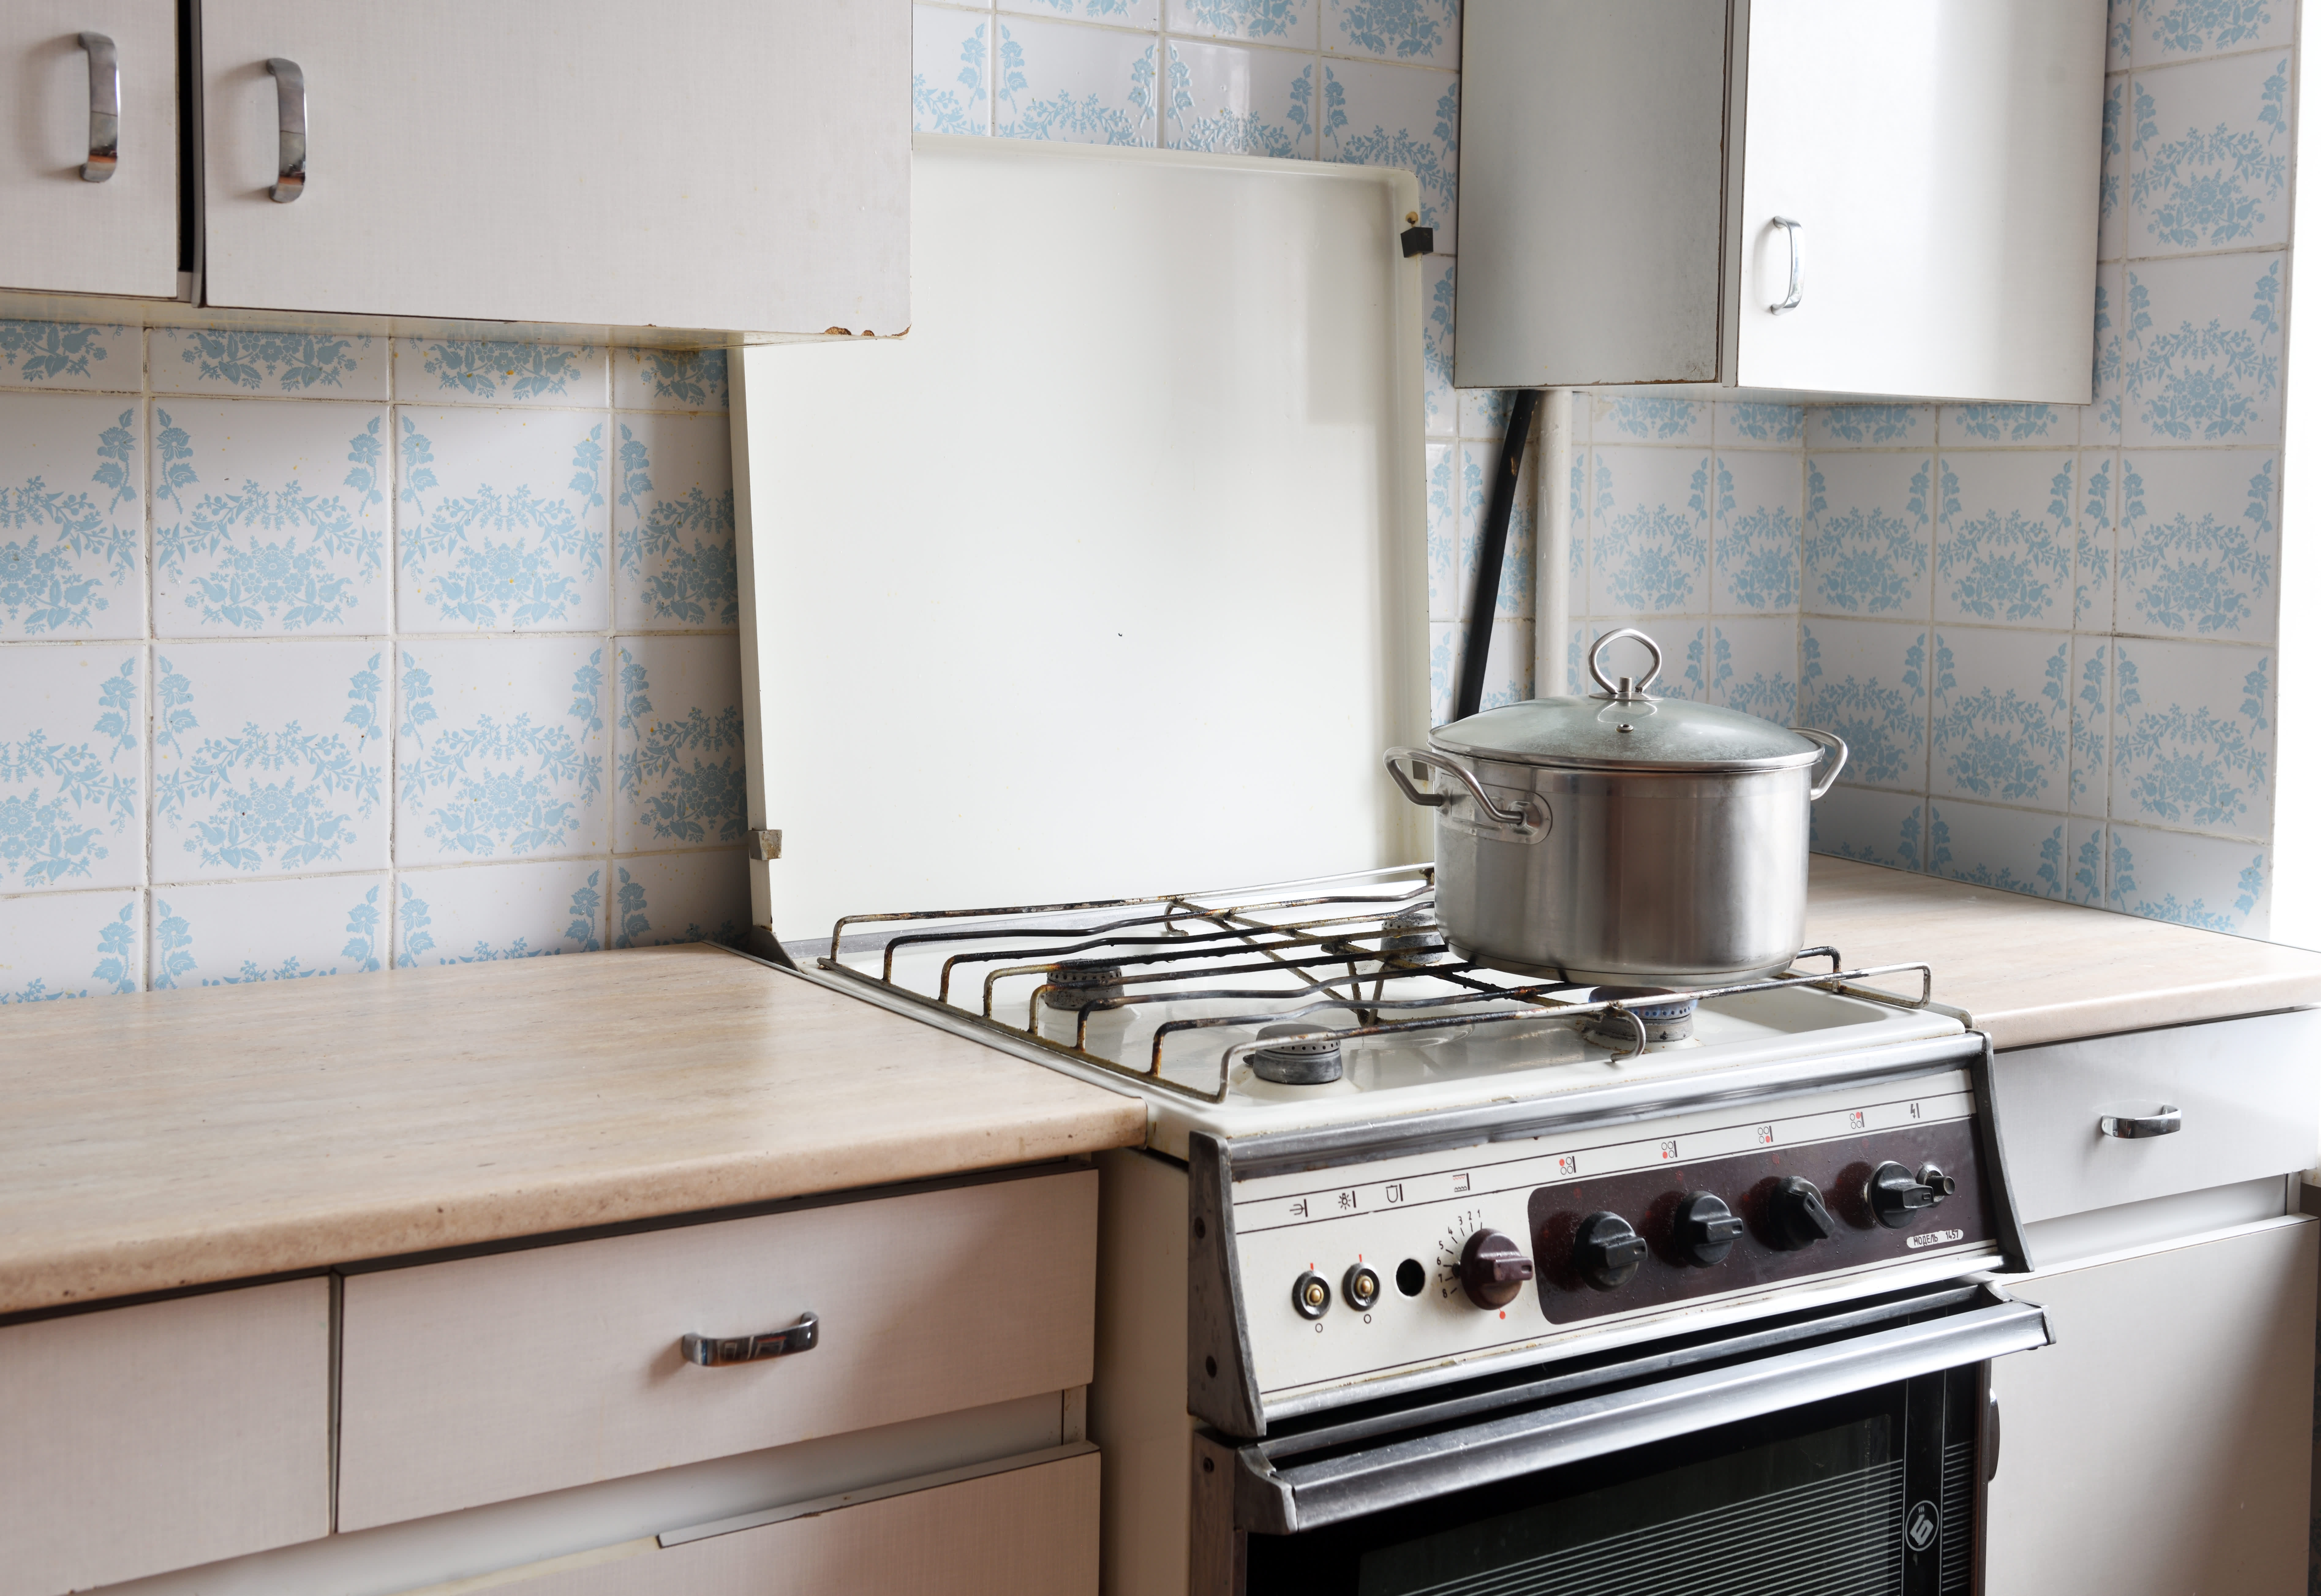 4 Kitchen Backsplash Trends on Their Way Out, According to Real Estate  Agents